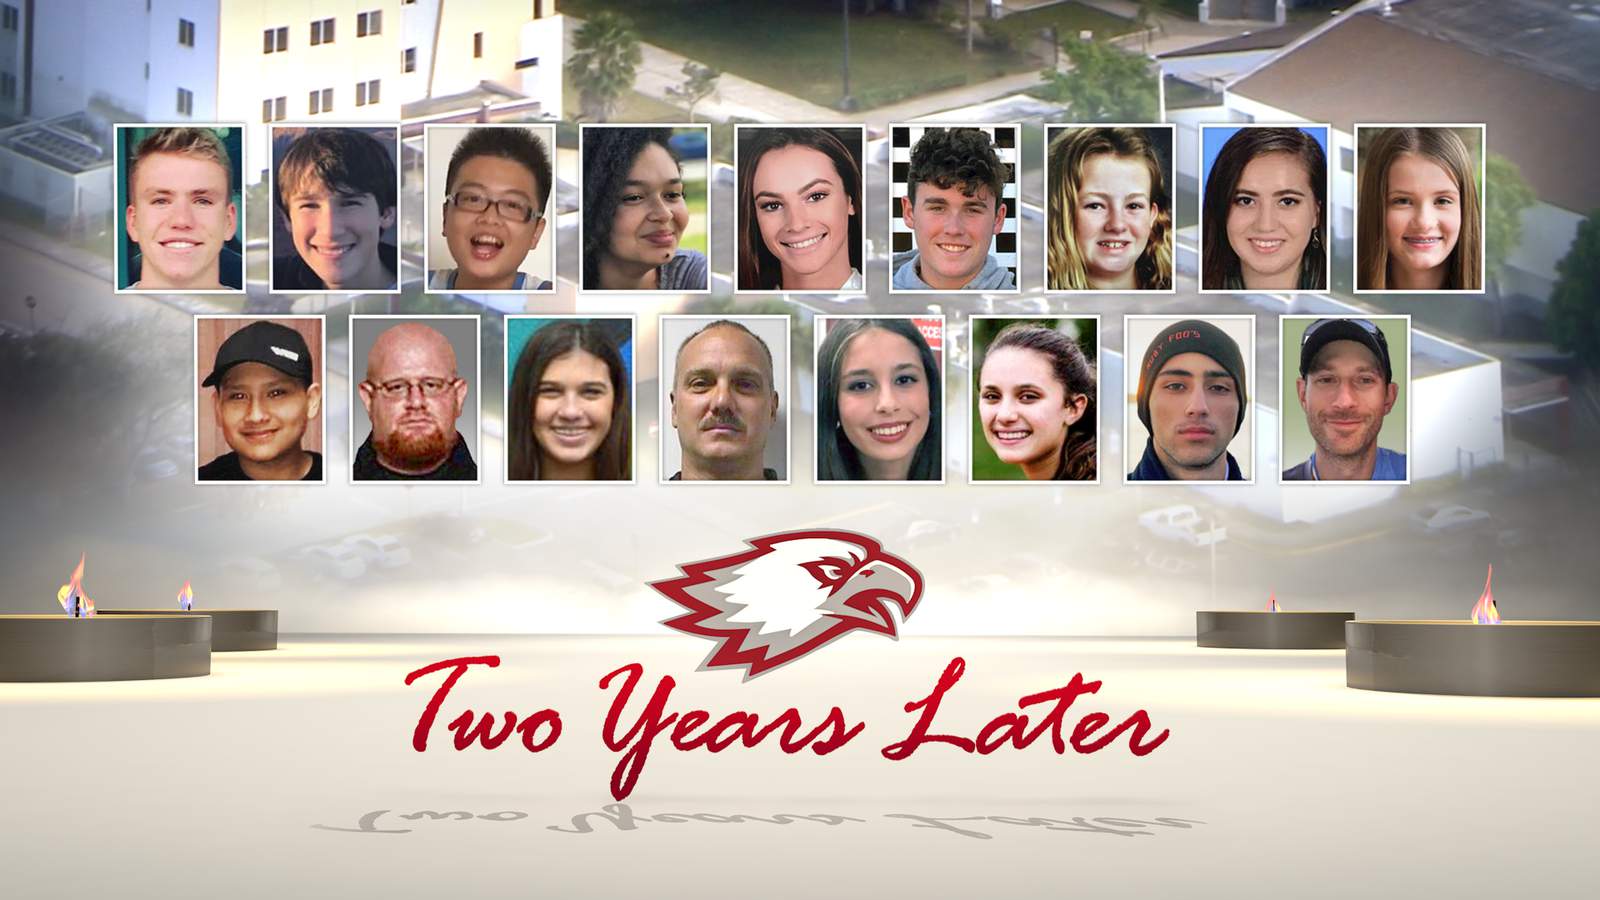 Community remembers Parkland school shooting victims, 2 years later